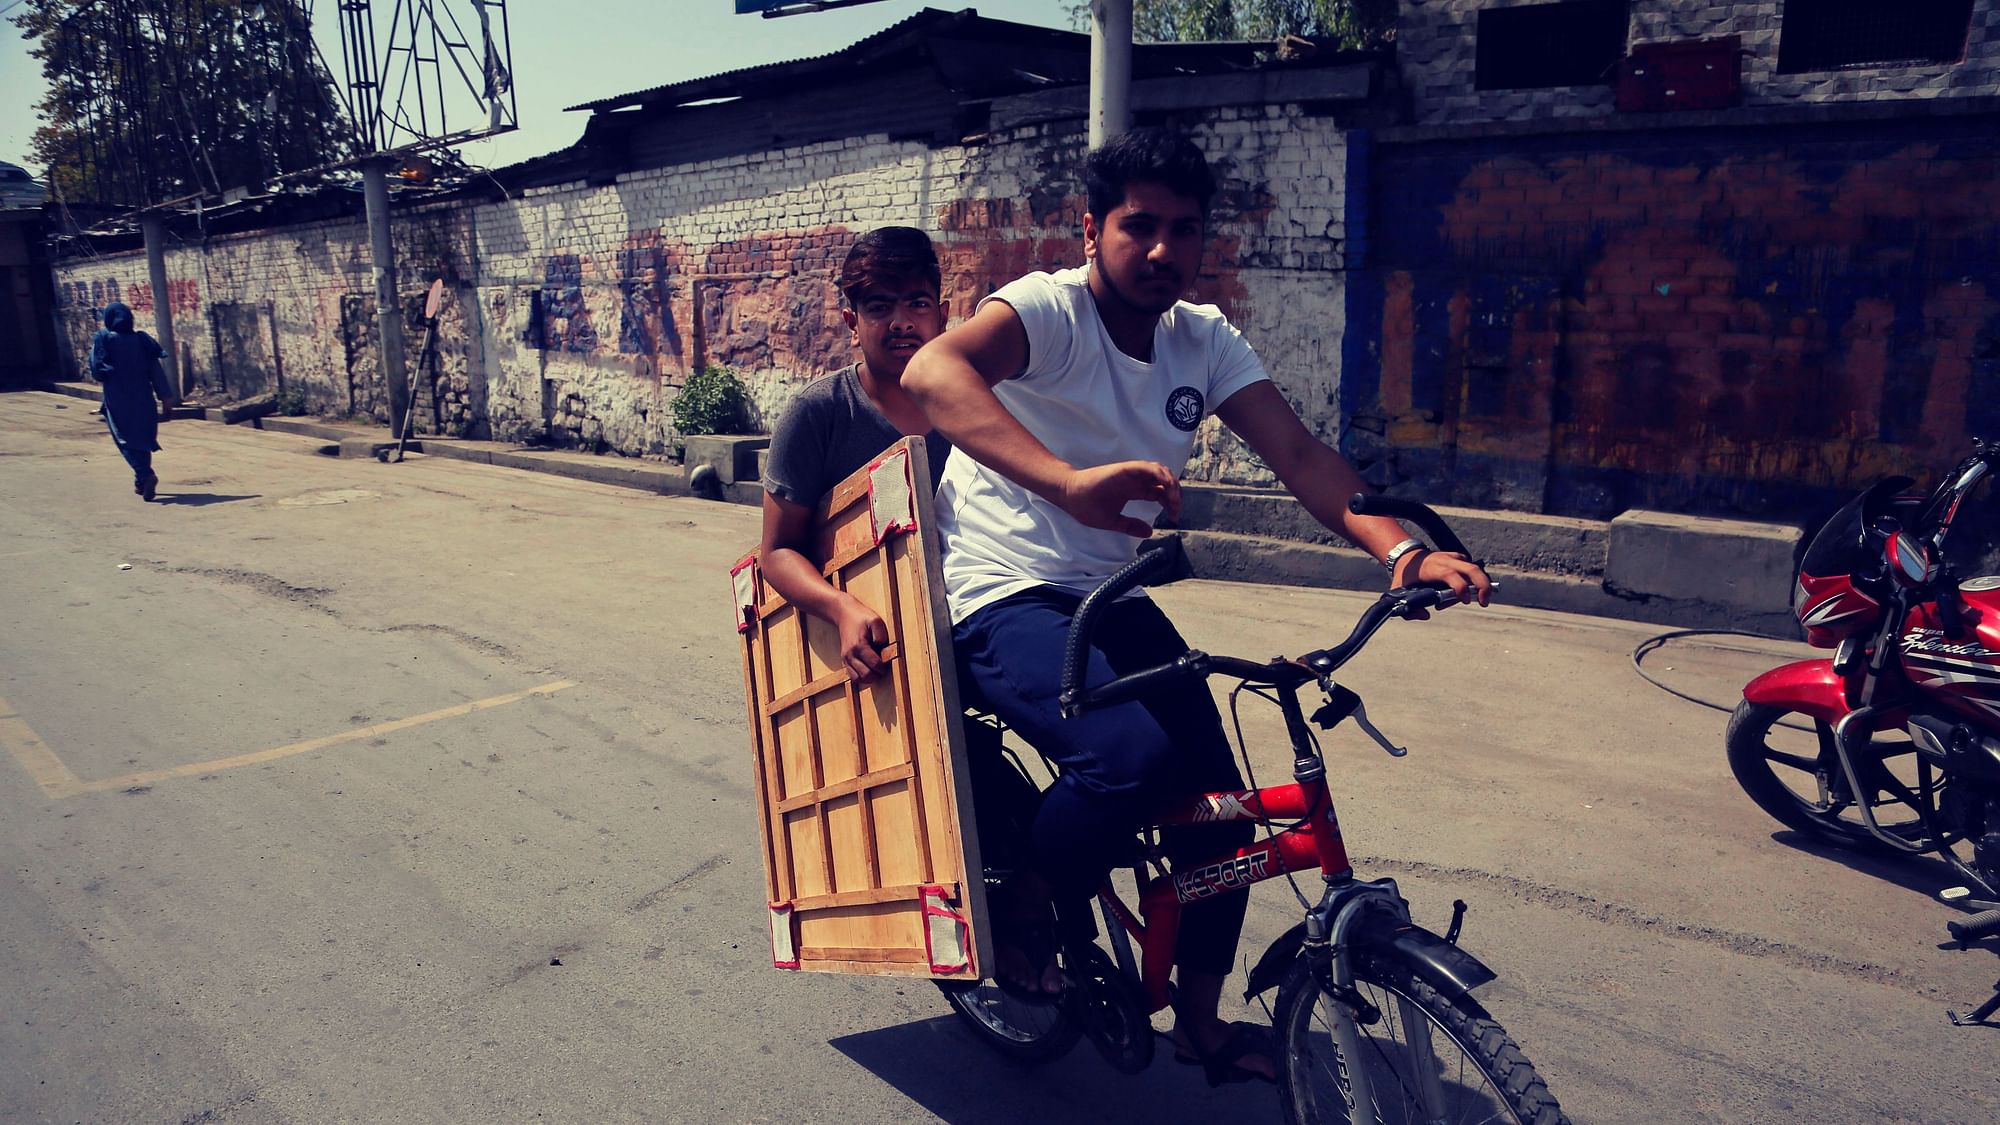 Kashmiri boys ride a bicycle carrying a carrom board in Srinagar, Indian controlled Kashmir, Thursday, Sept. 5, 2019. Image used for representational purposes.